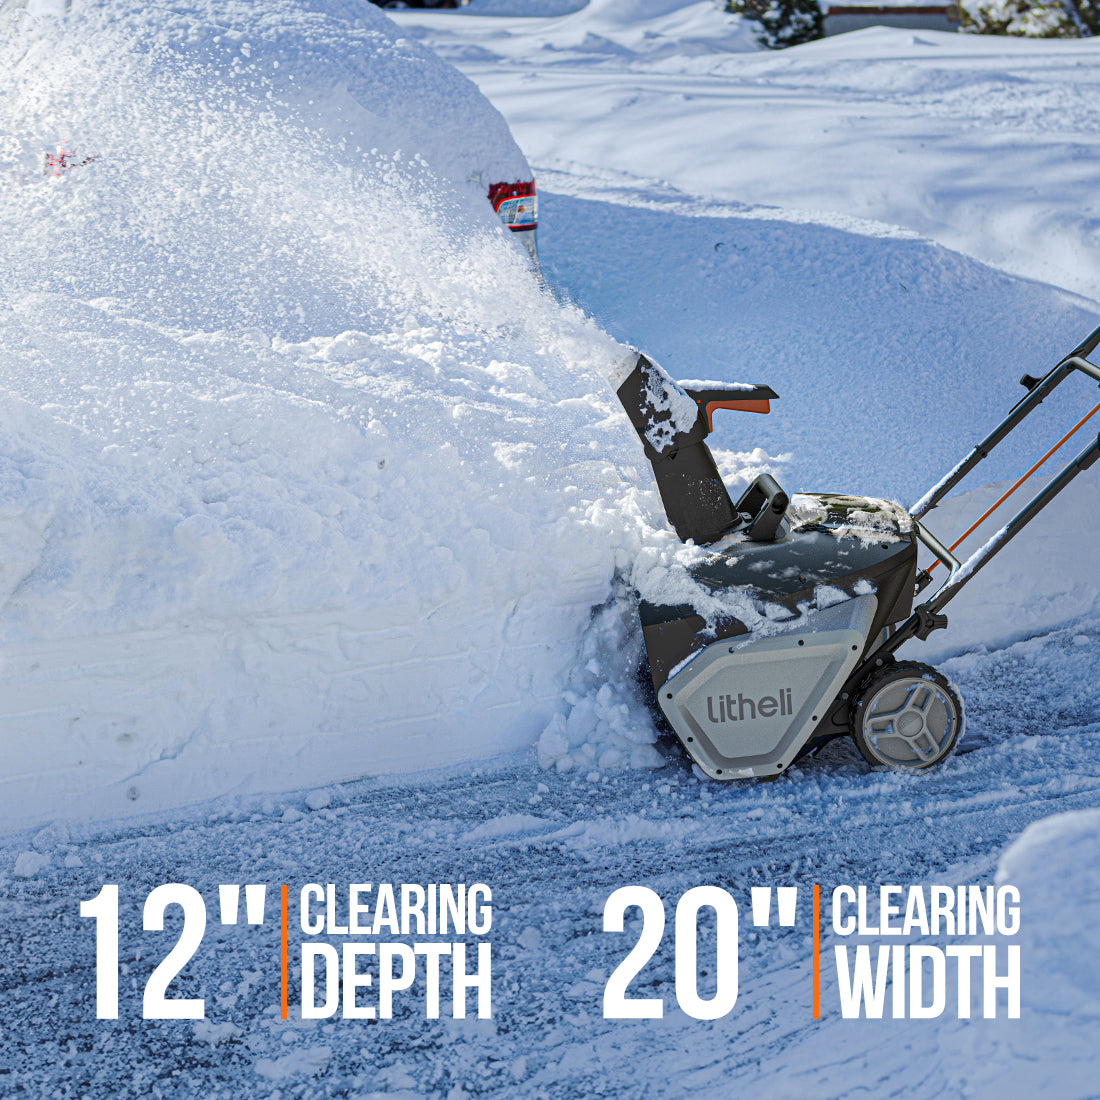  Snow Blowers - Battery / Snow Blowers / Snow Removal Tools:  Patio, Lawn & Garden